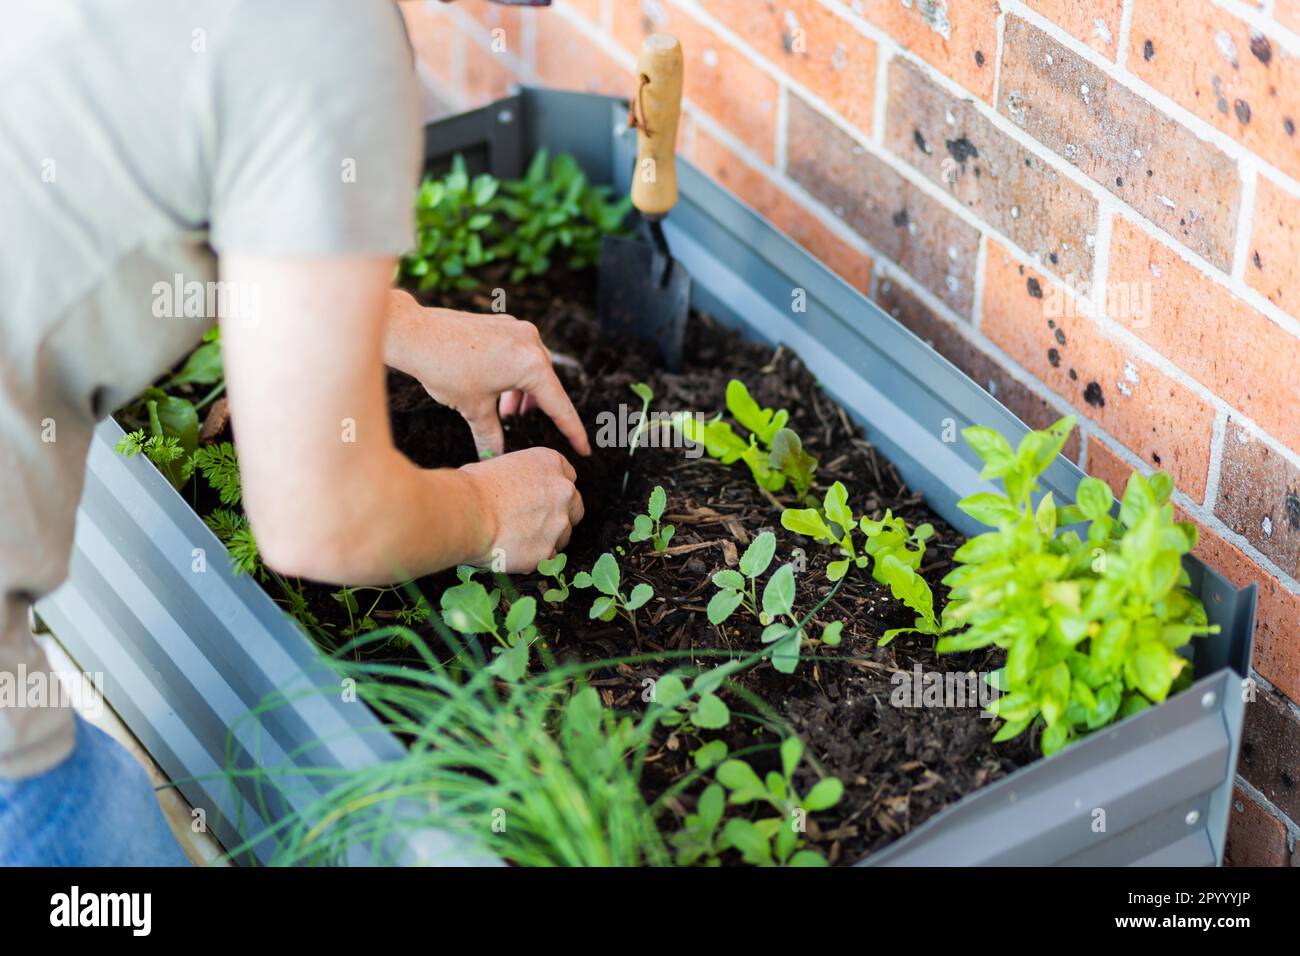 urban gardening woman planting seedlings in raised garden bed on back deck of unit home Stock Photo